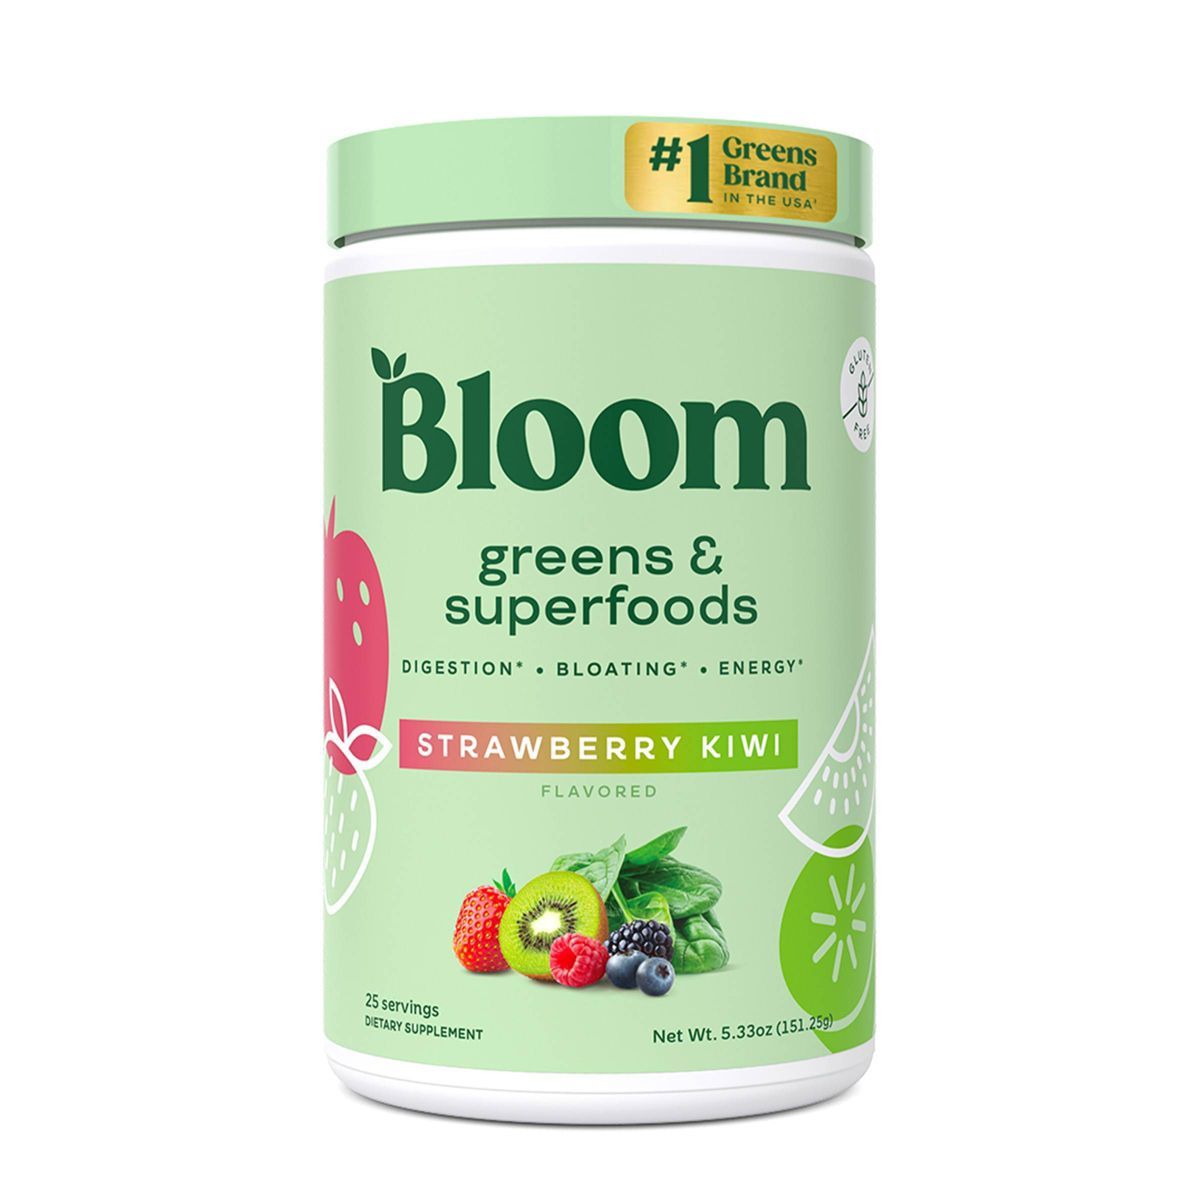 BLOOM NUTRITION Greens and Superfoods Powder - Strawberry Kiwi | Target